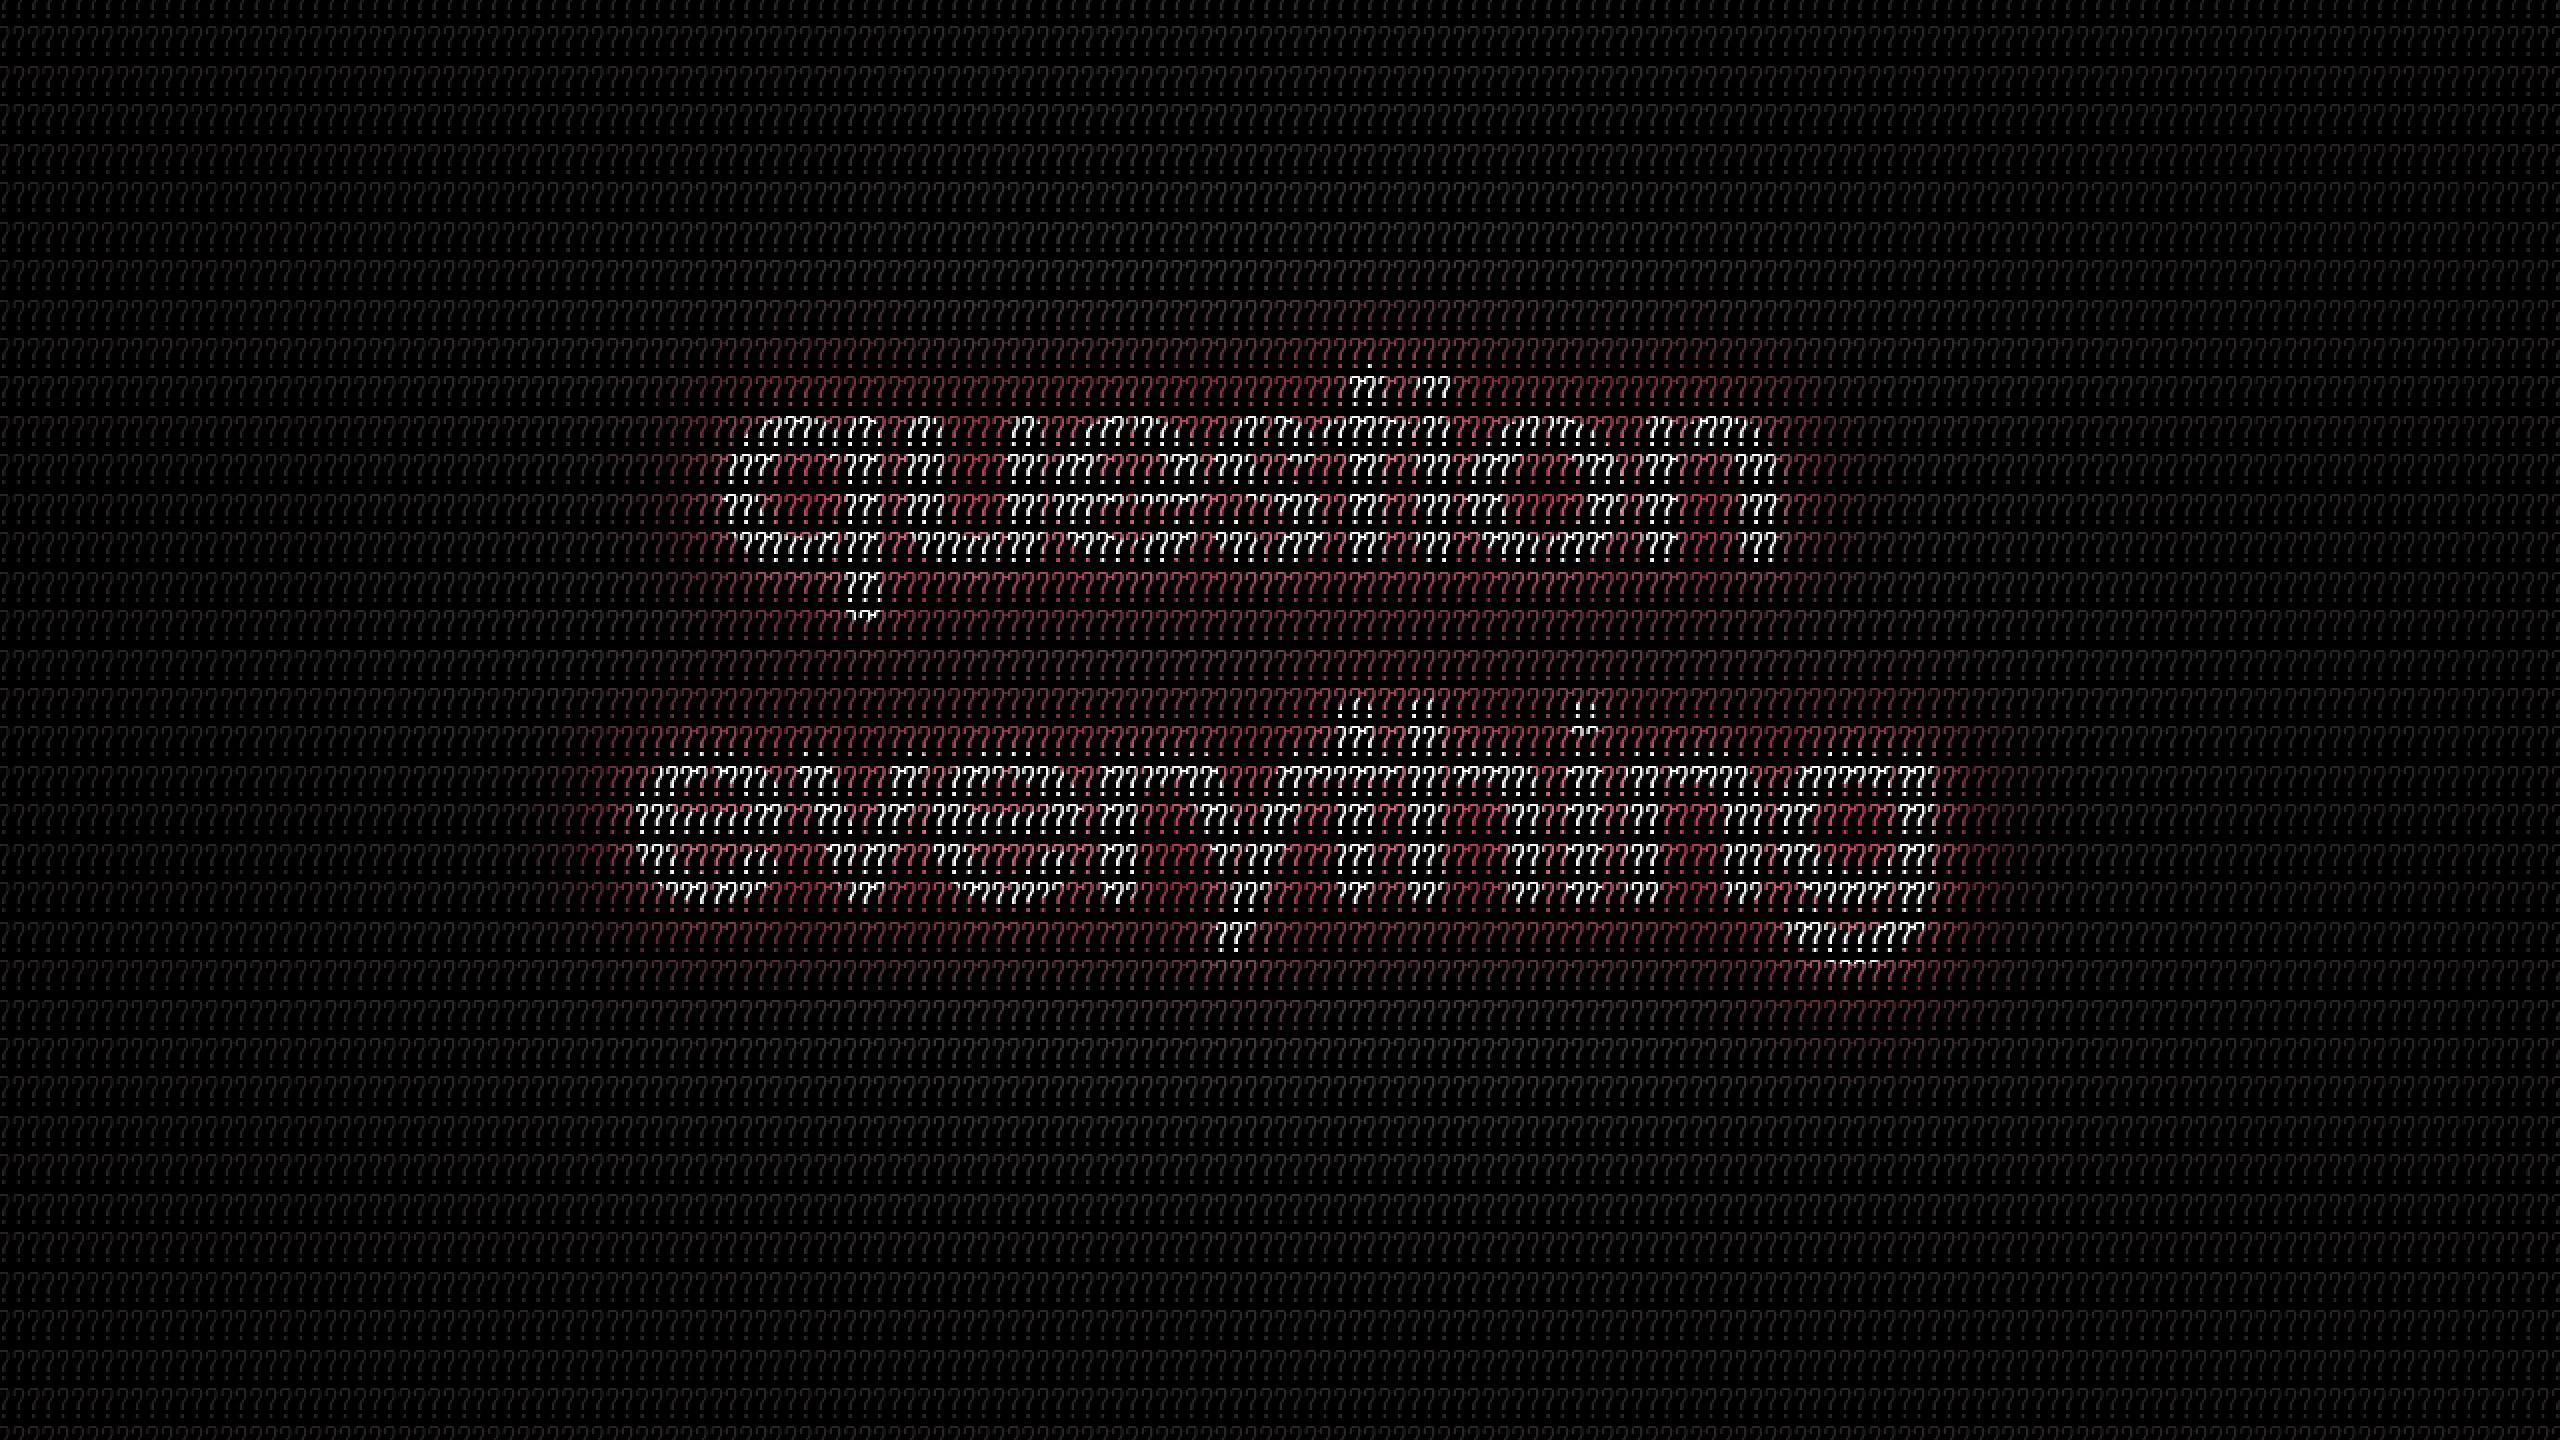 typography everything question mark #QFHU